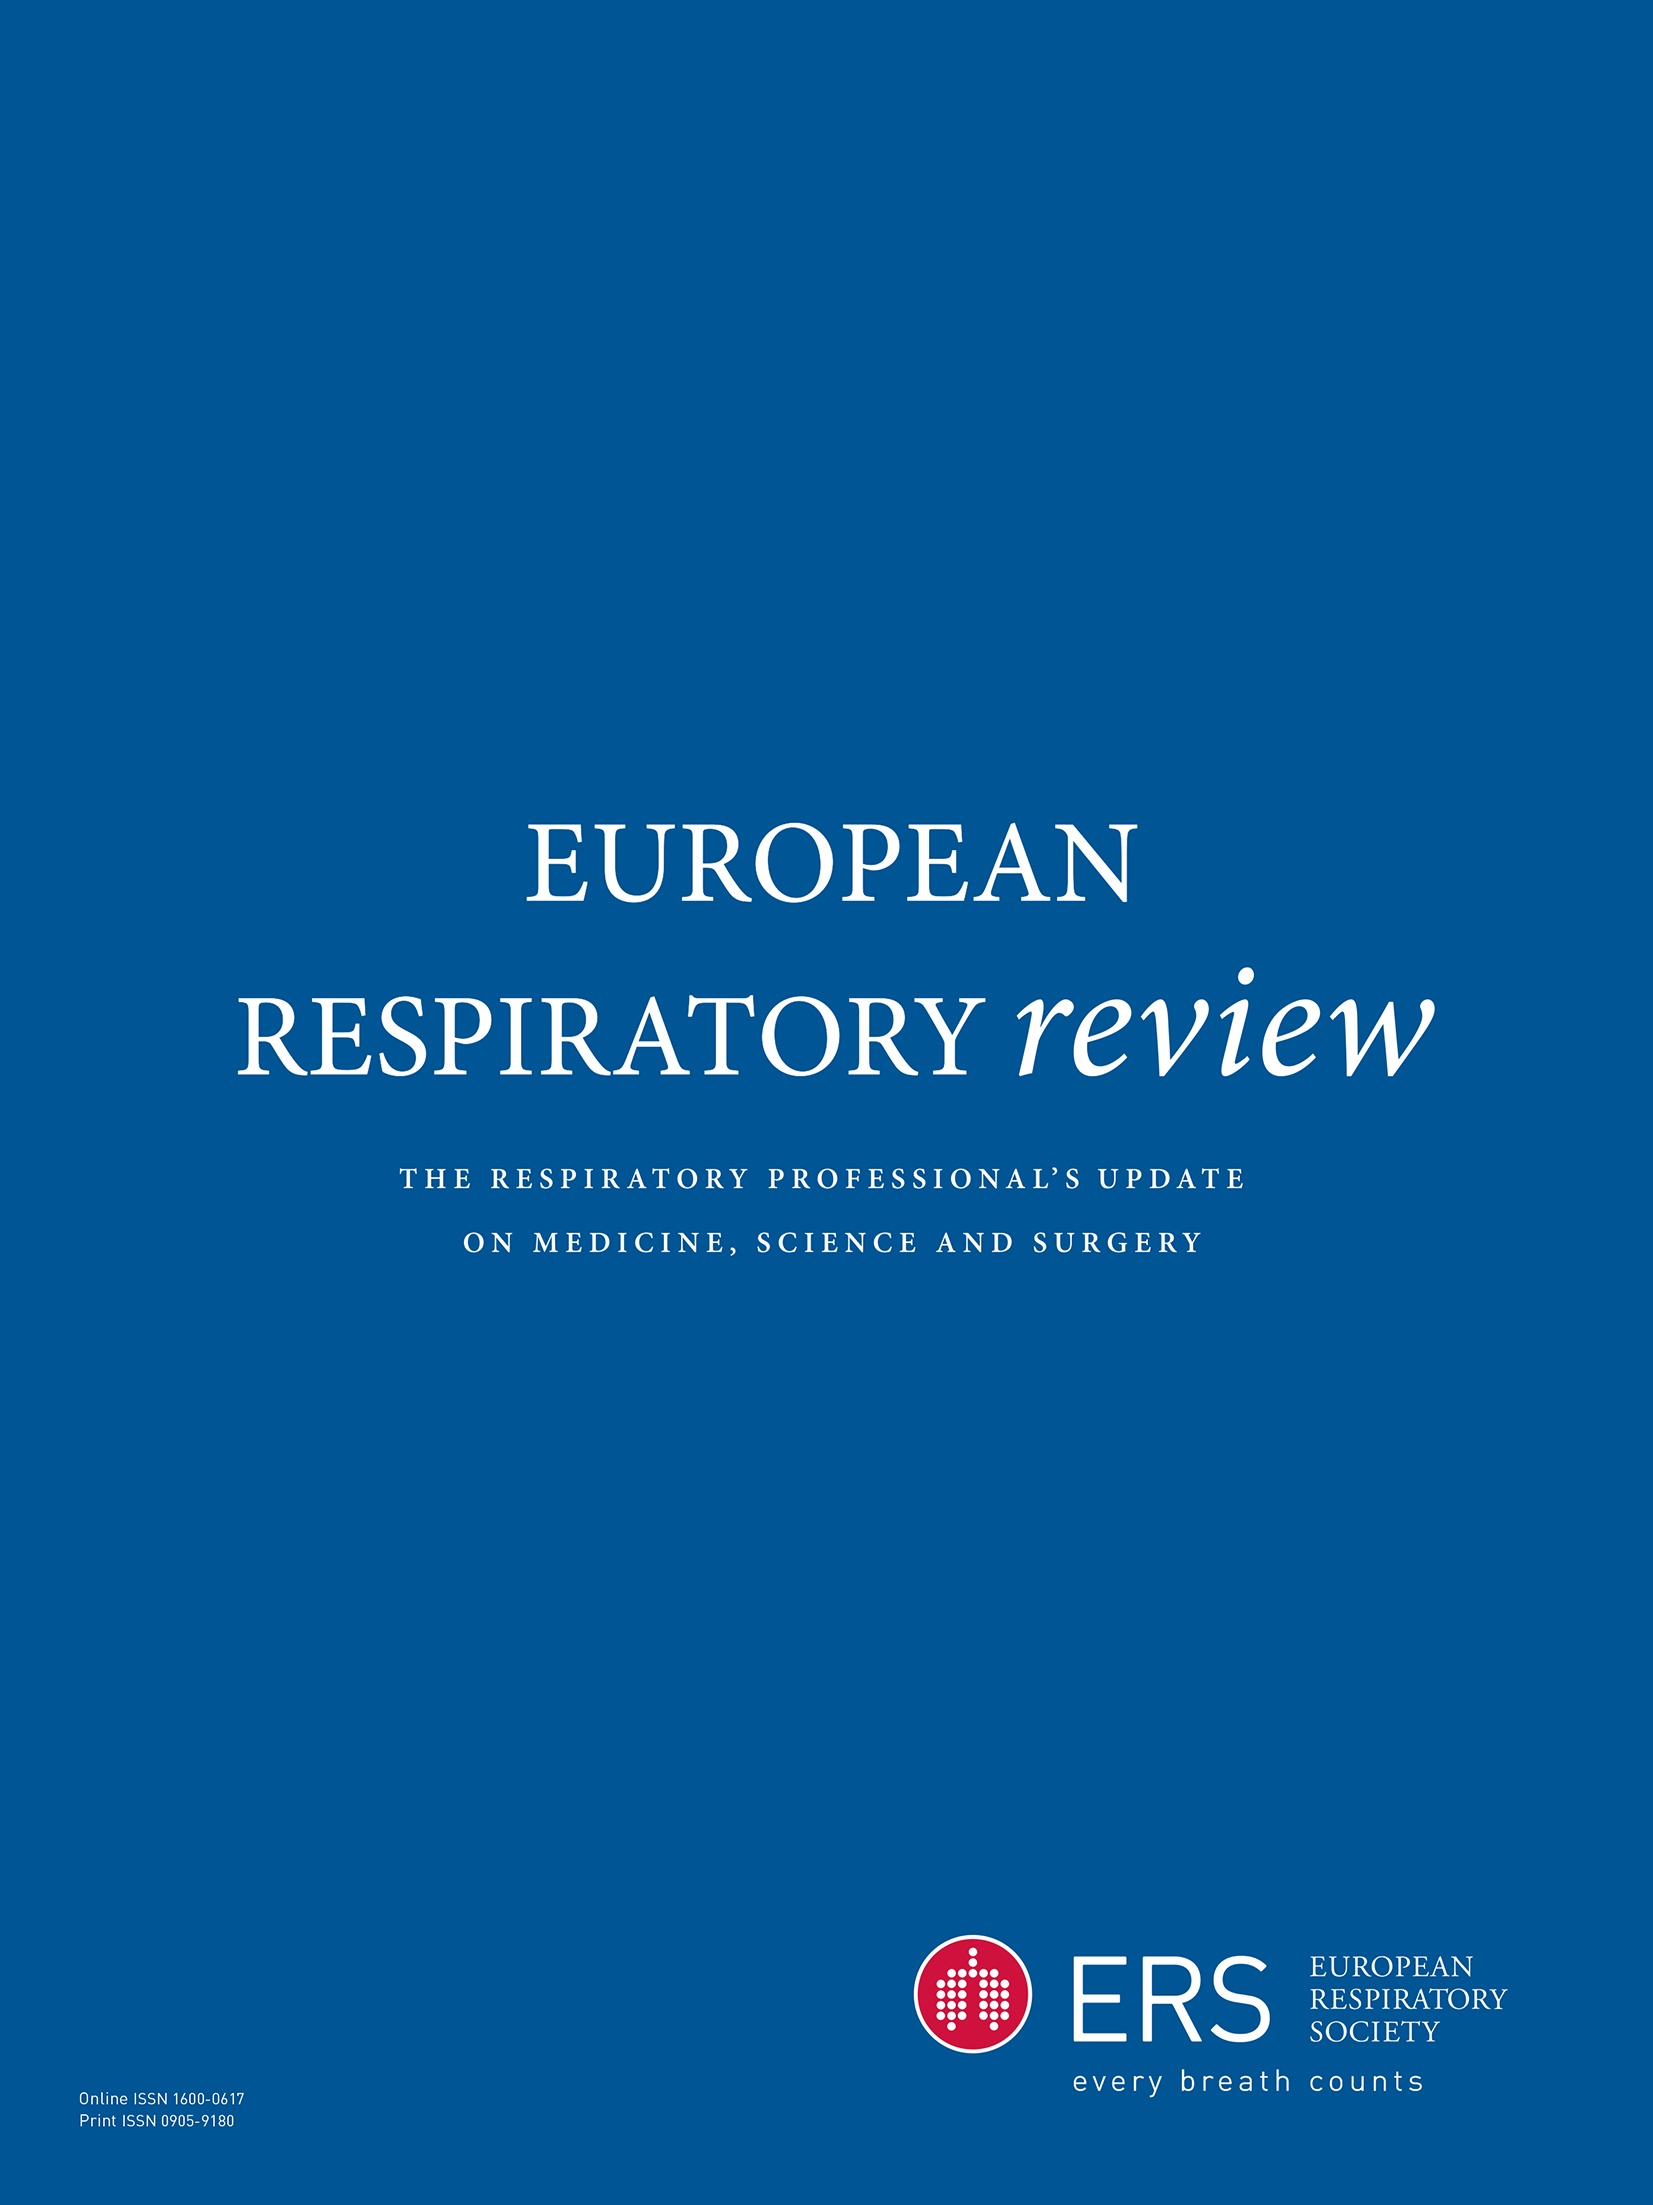 Lung cancer risk and occupational pulmonary fibrosis: systematic review and meta-analysis